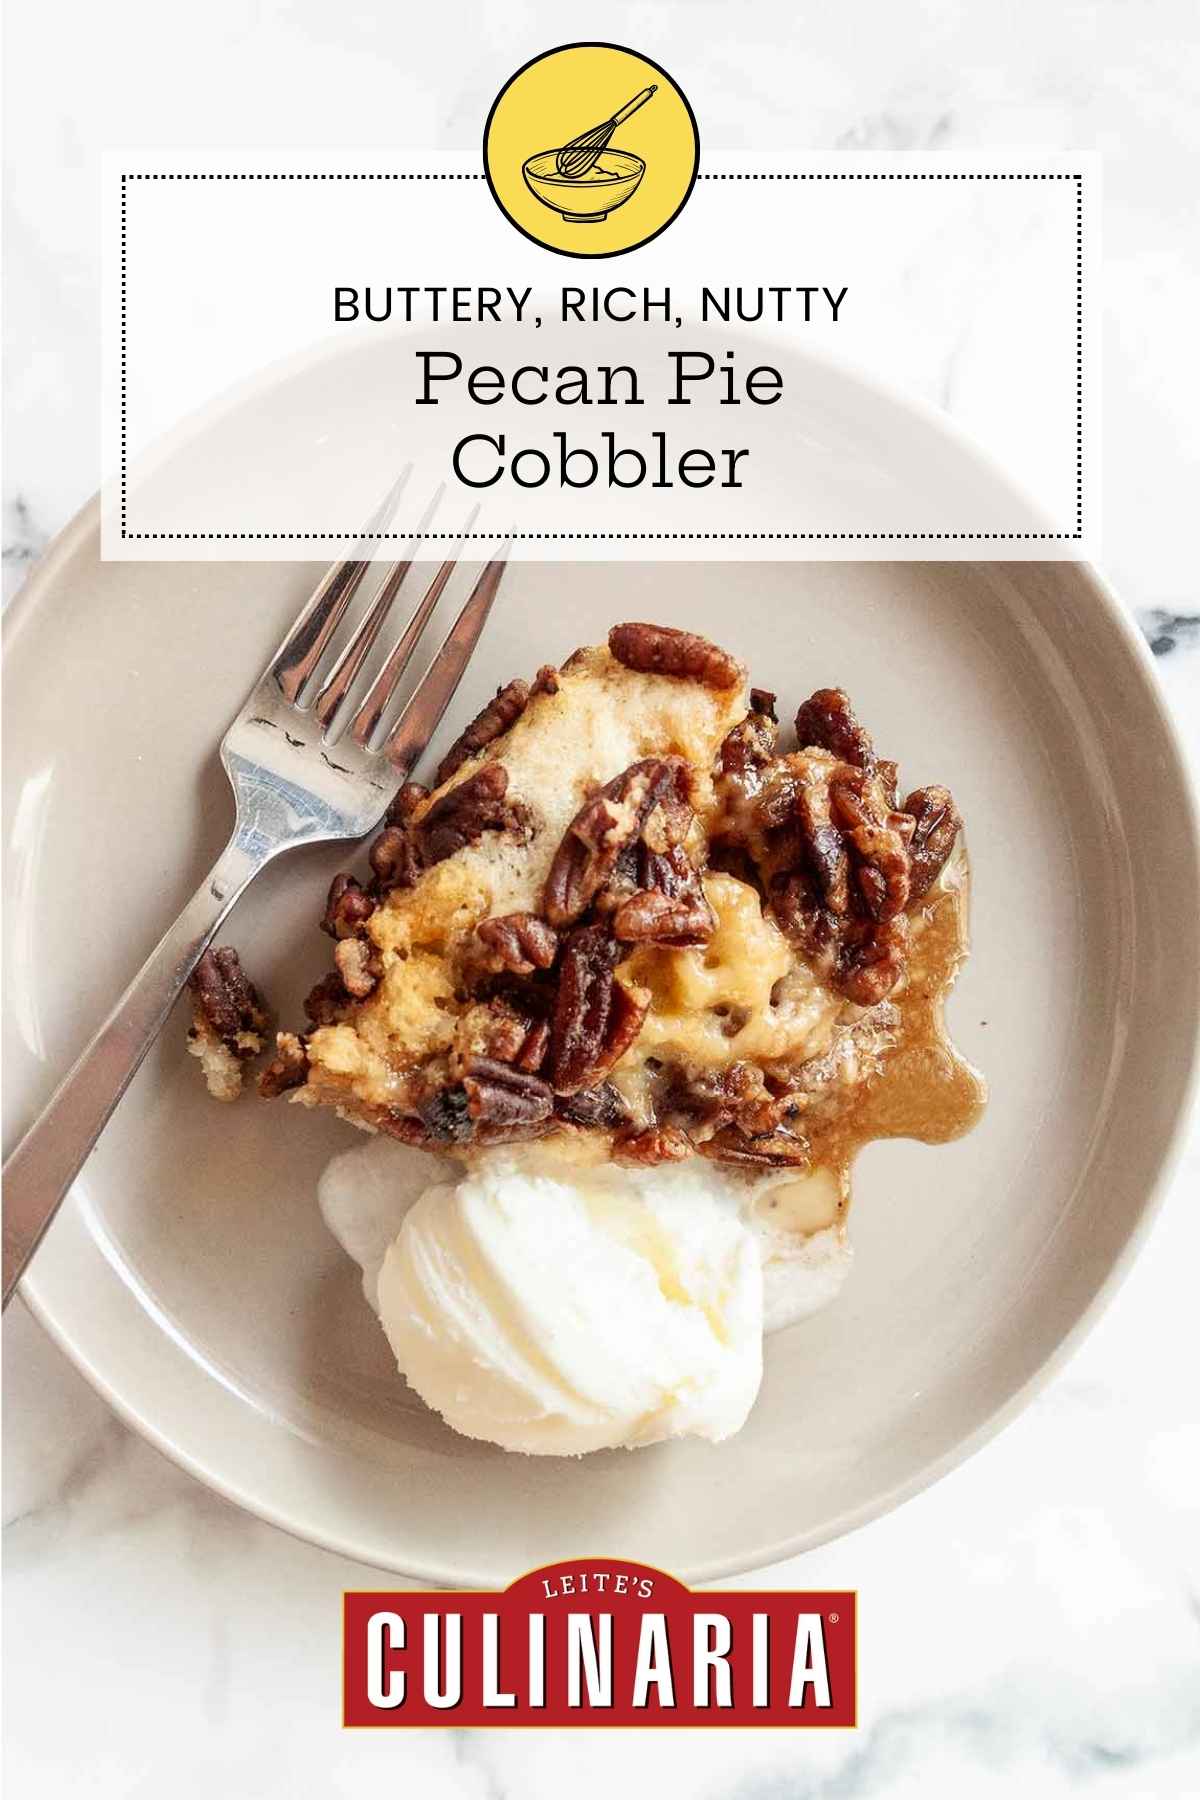 A serving of pecan pie cobbler with a scoop of ice cream and a fork on the side.